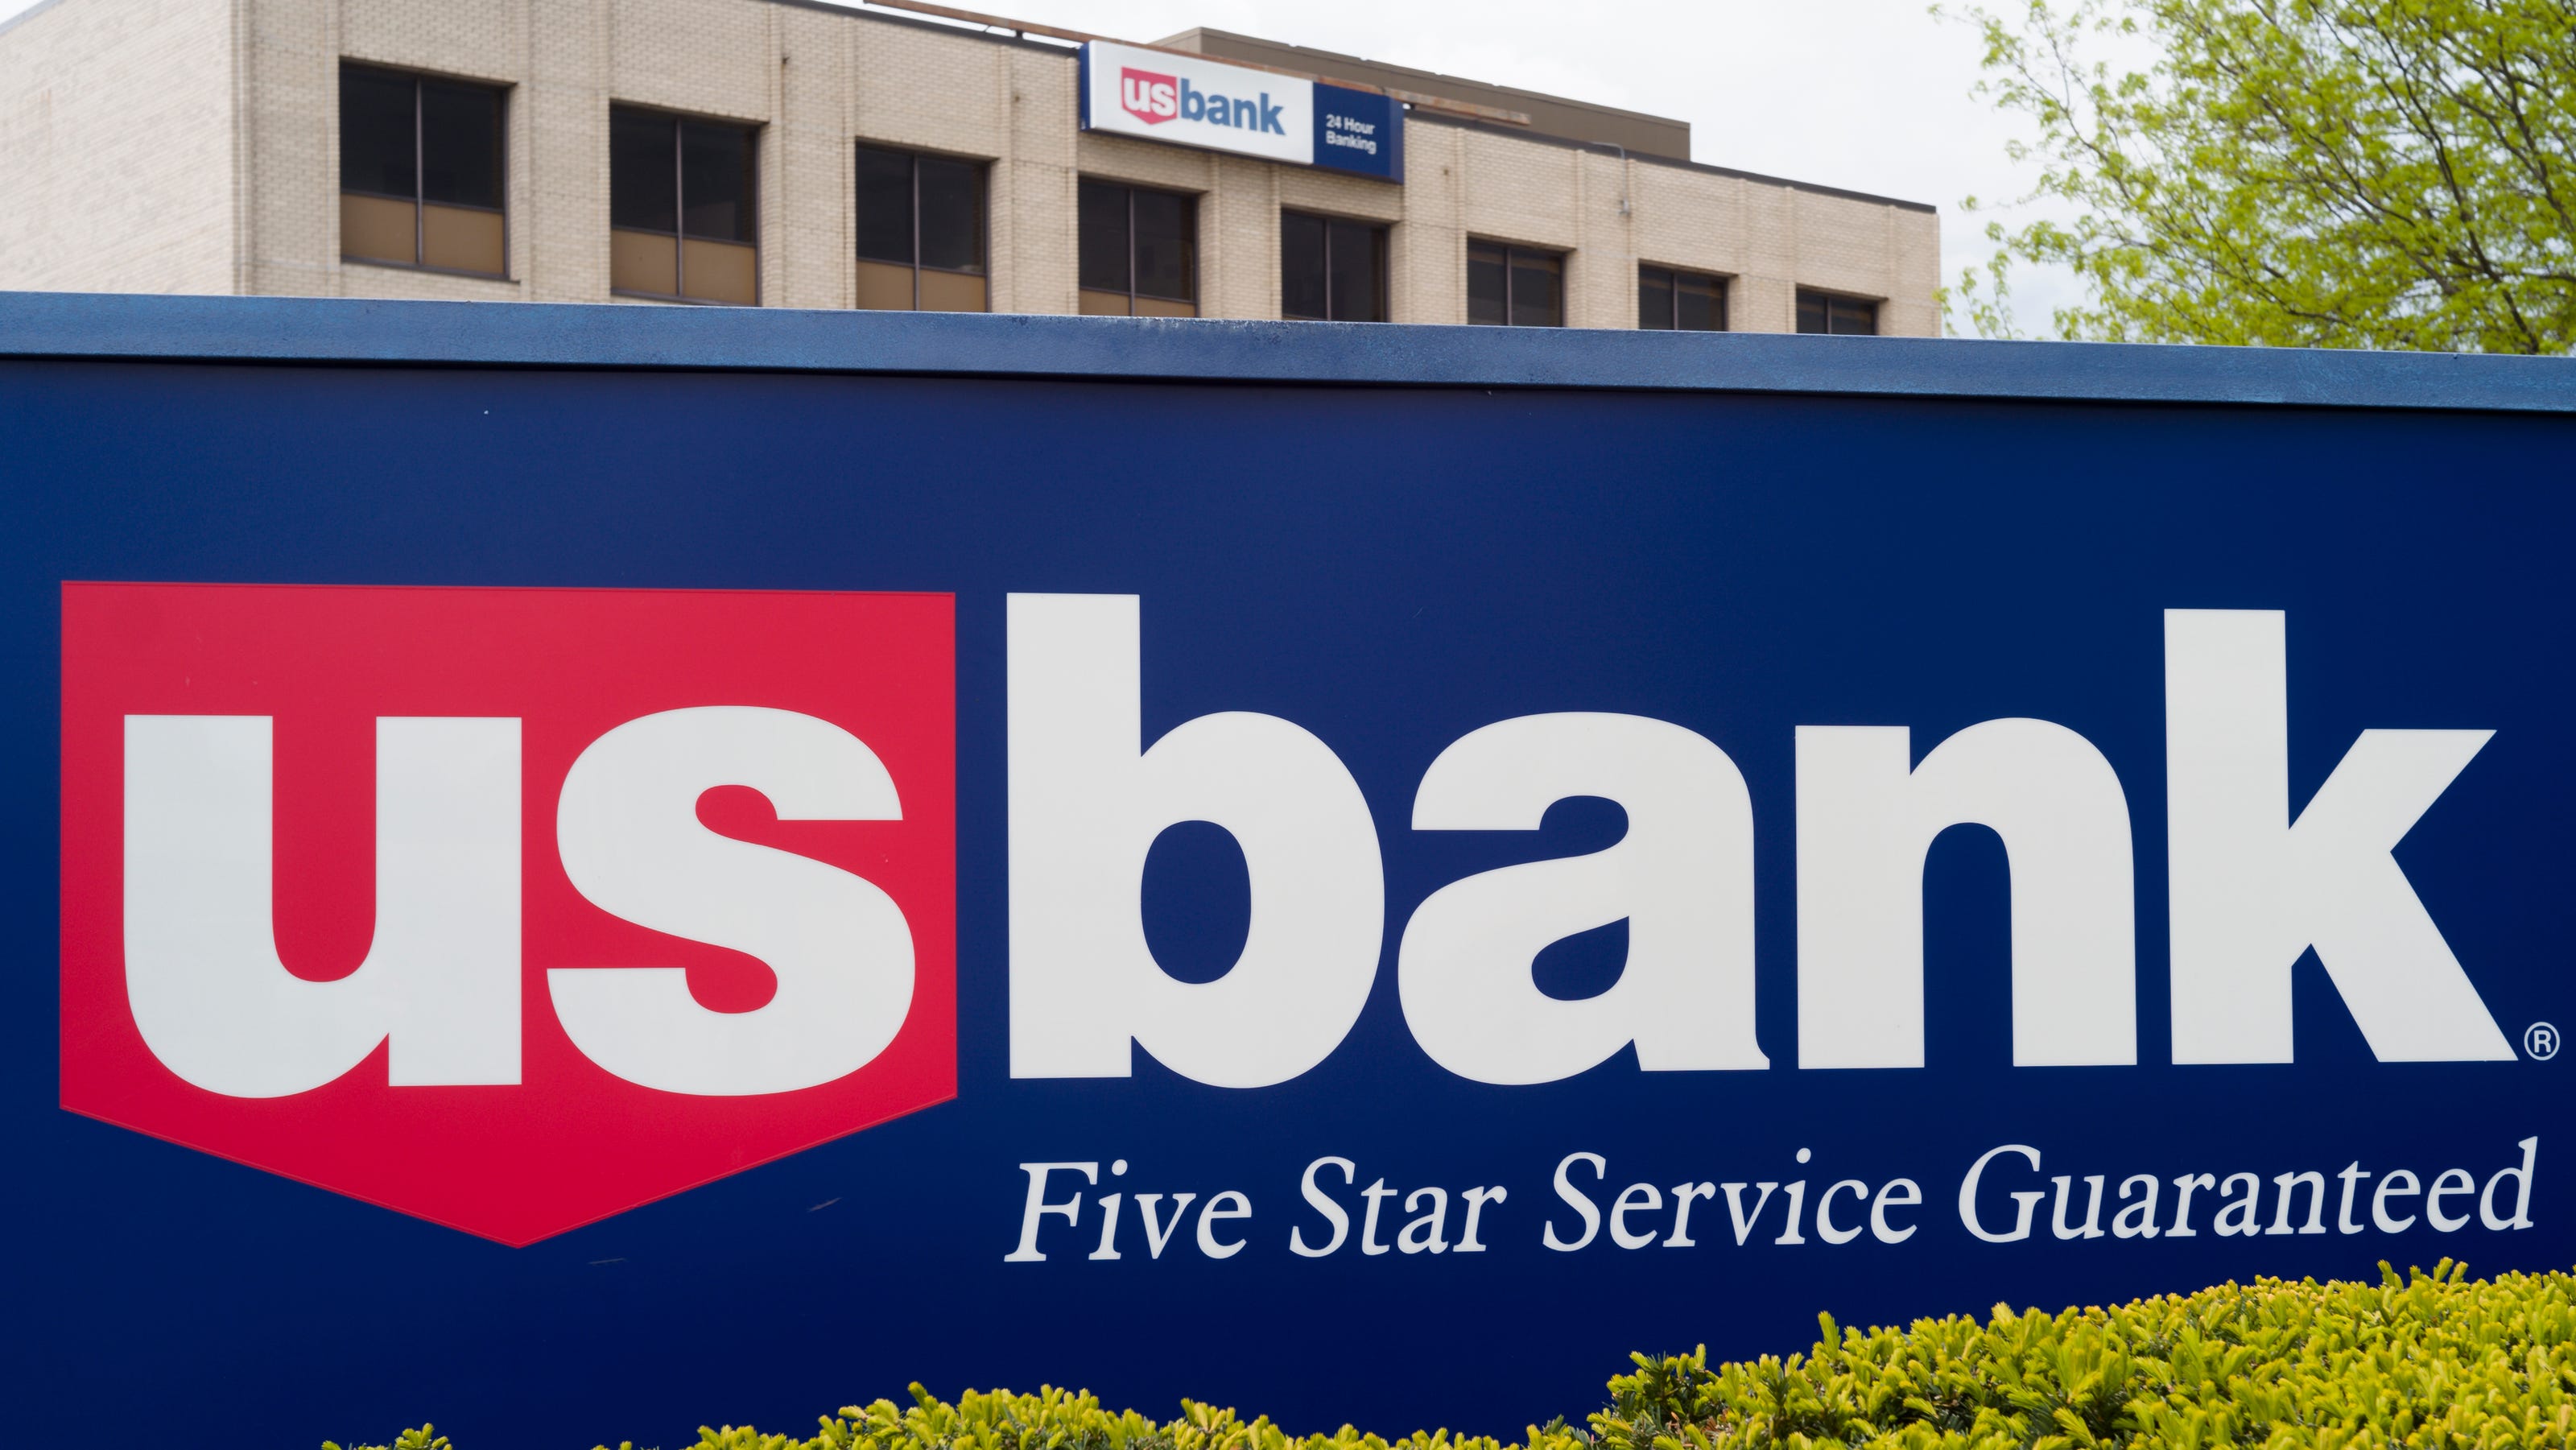  Ohio service rep charged in theft of $1.1 million using U.S. Bank customer debit cards, feds say 